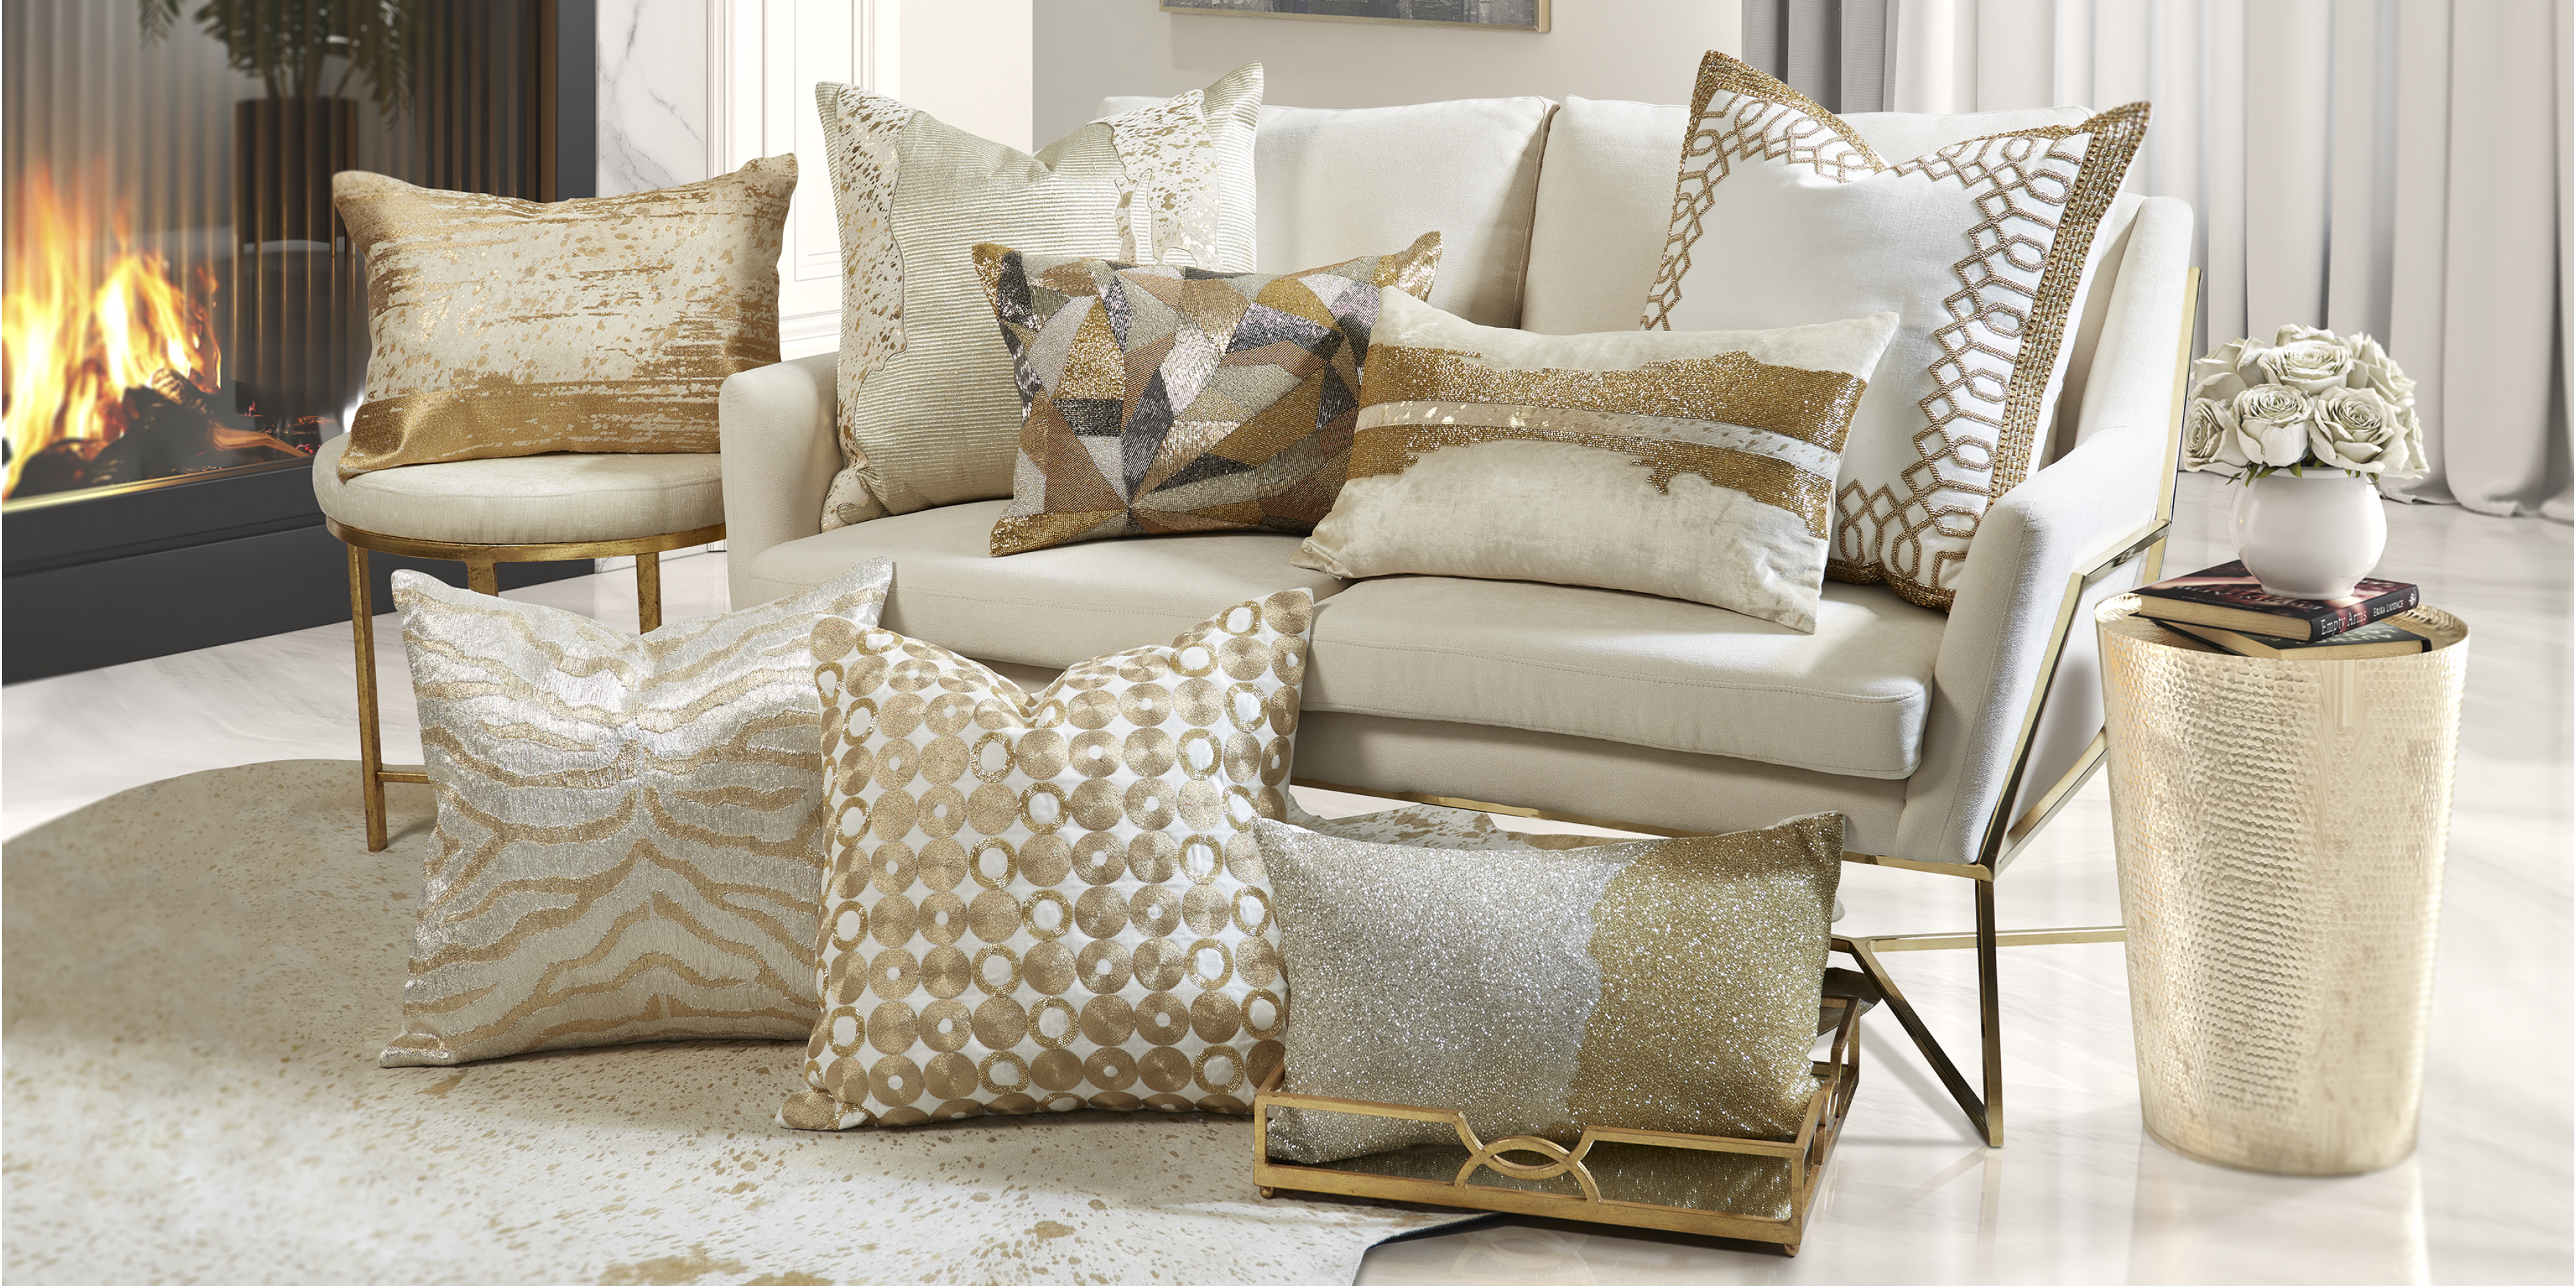 Bedding and Decorative Pillows